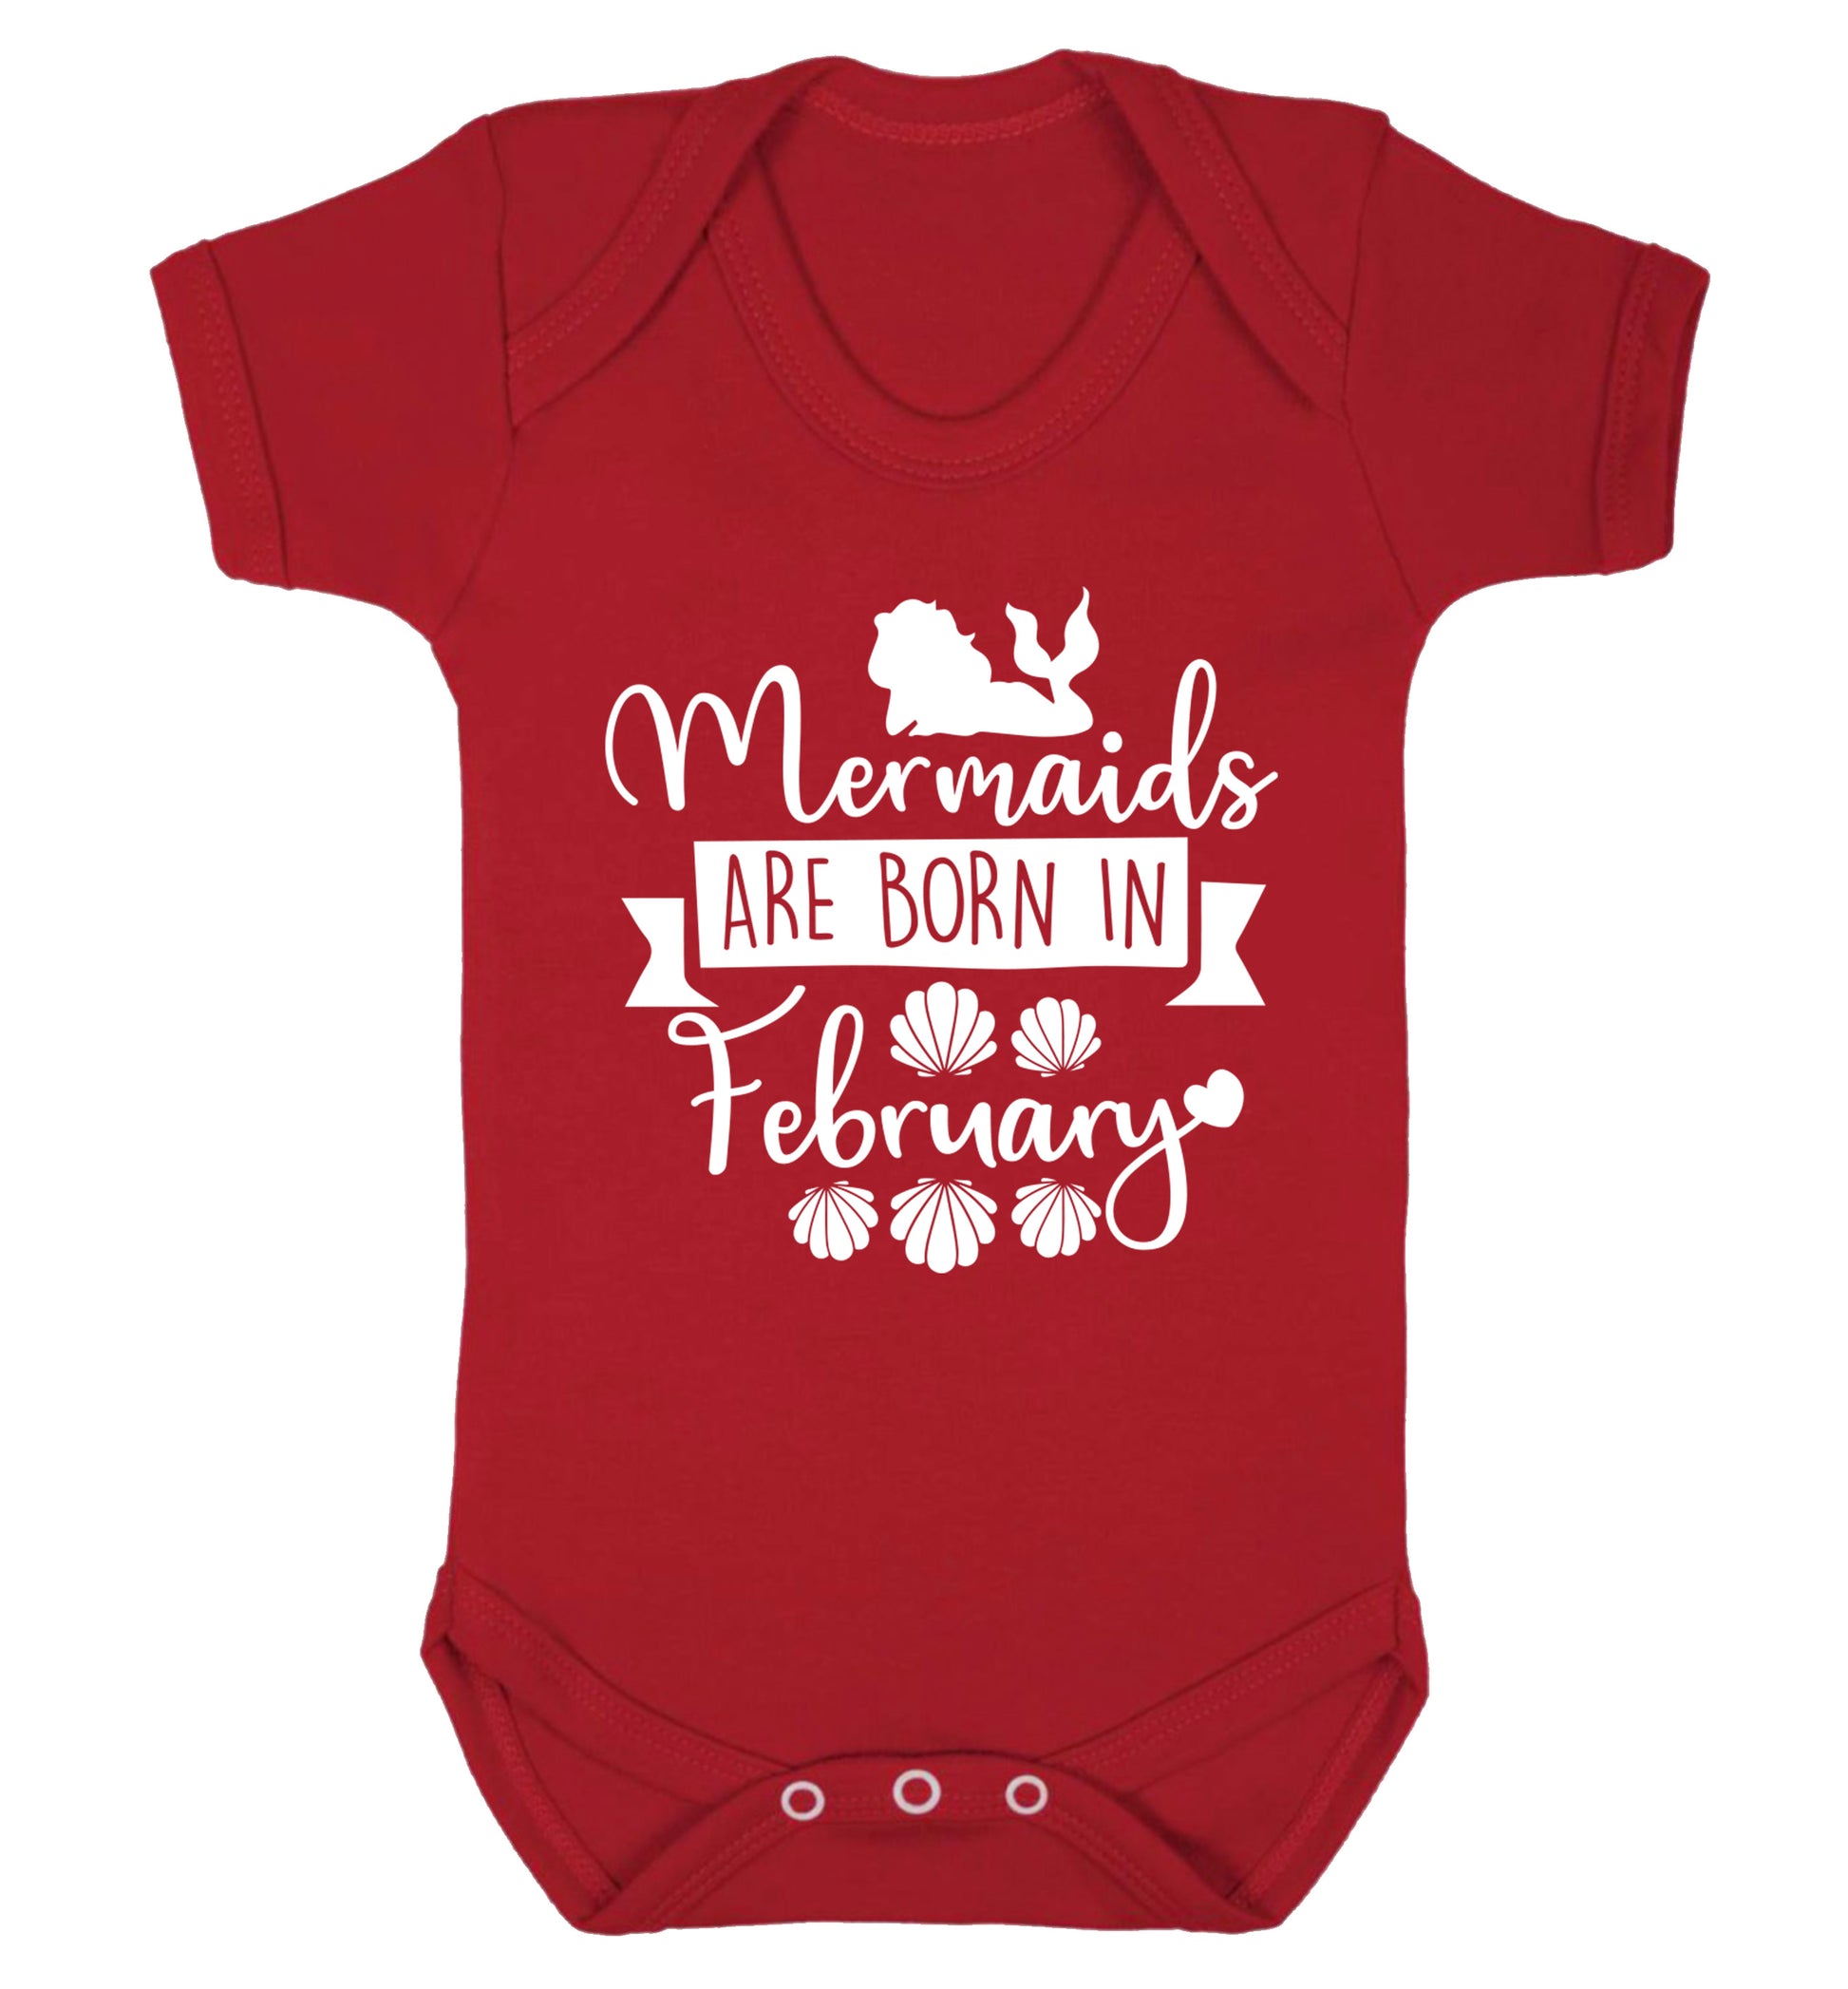 Mermaids are born in February Baby Vest red 18-24 months